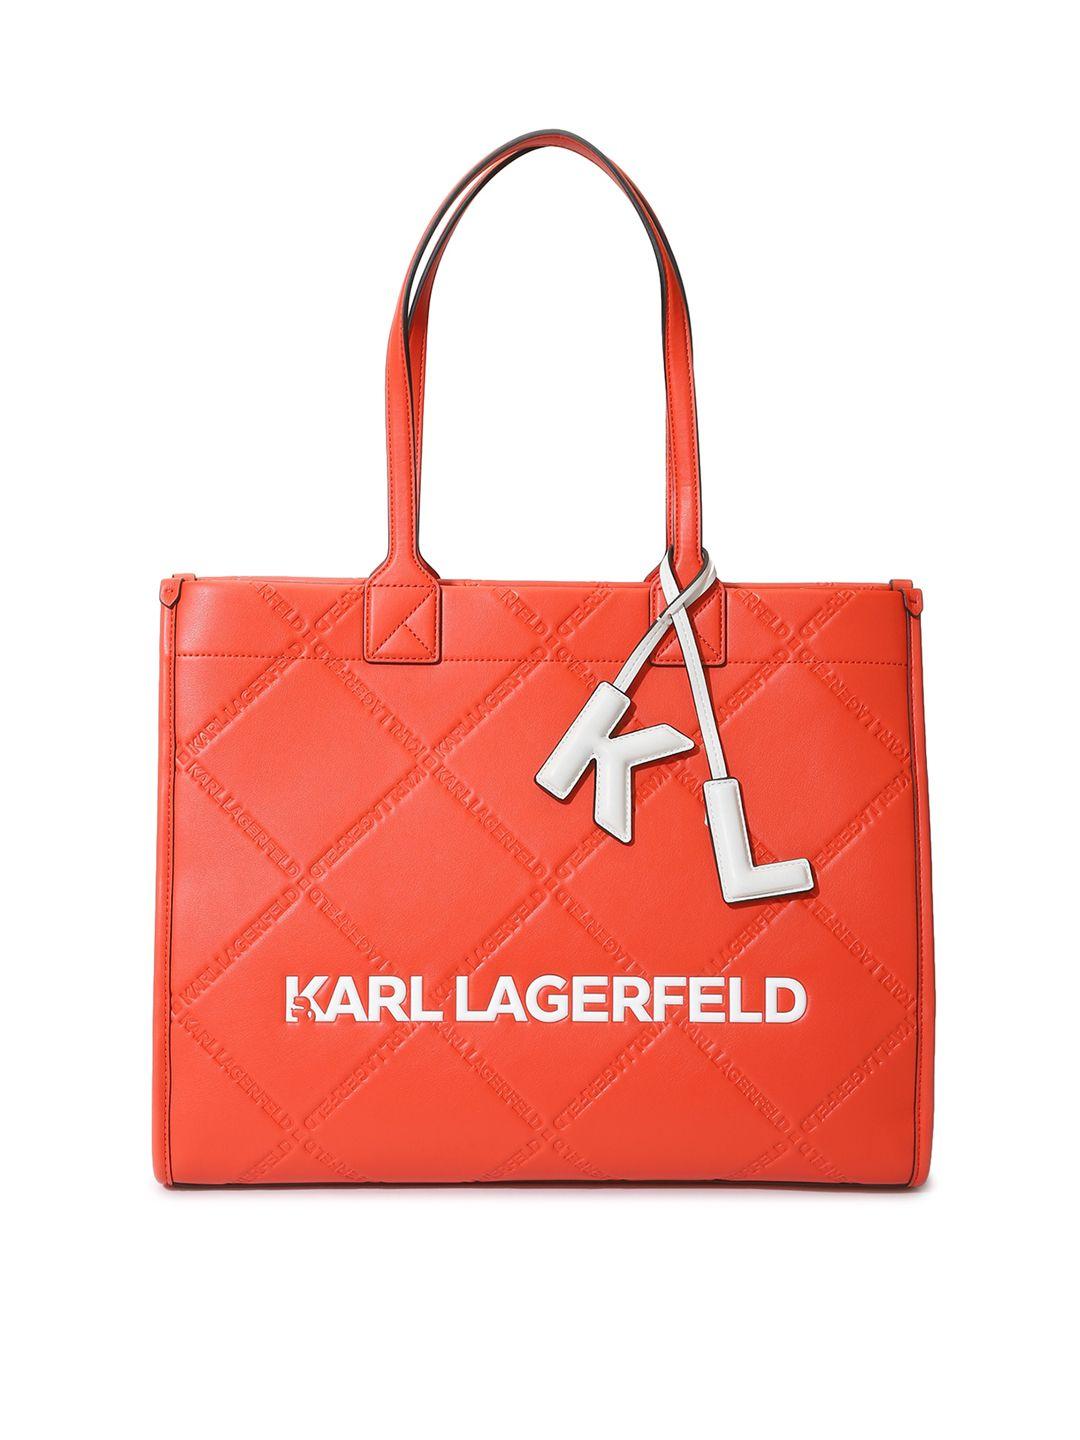 karl lagerfeld red textured leather structured handheld bag